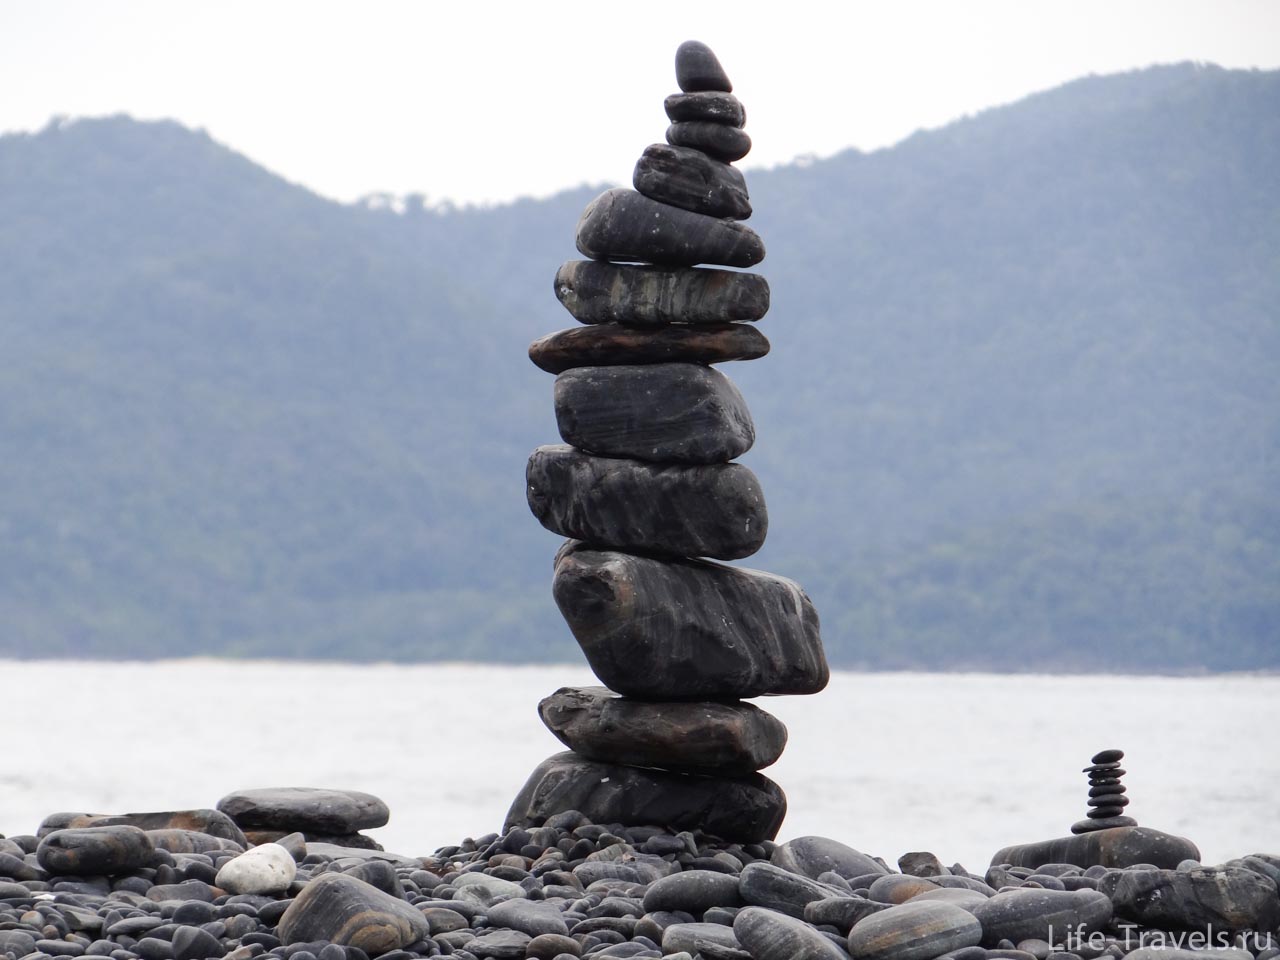 Stone tower of pebbles